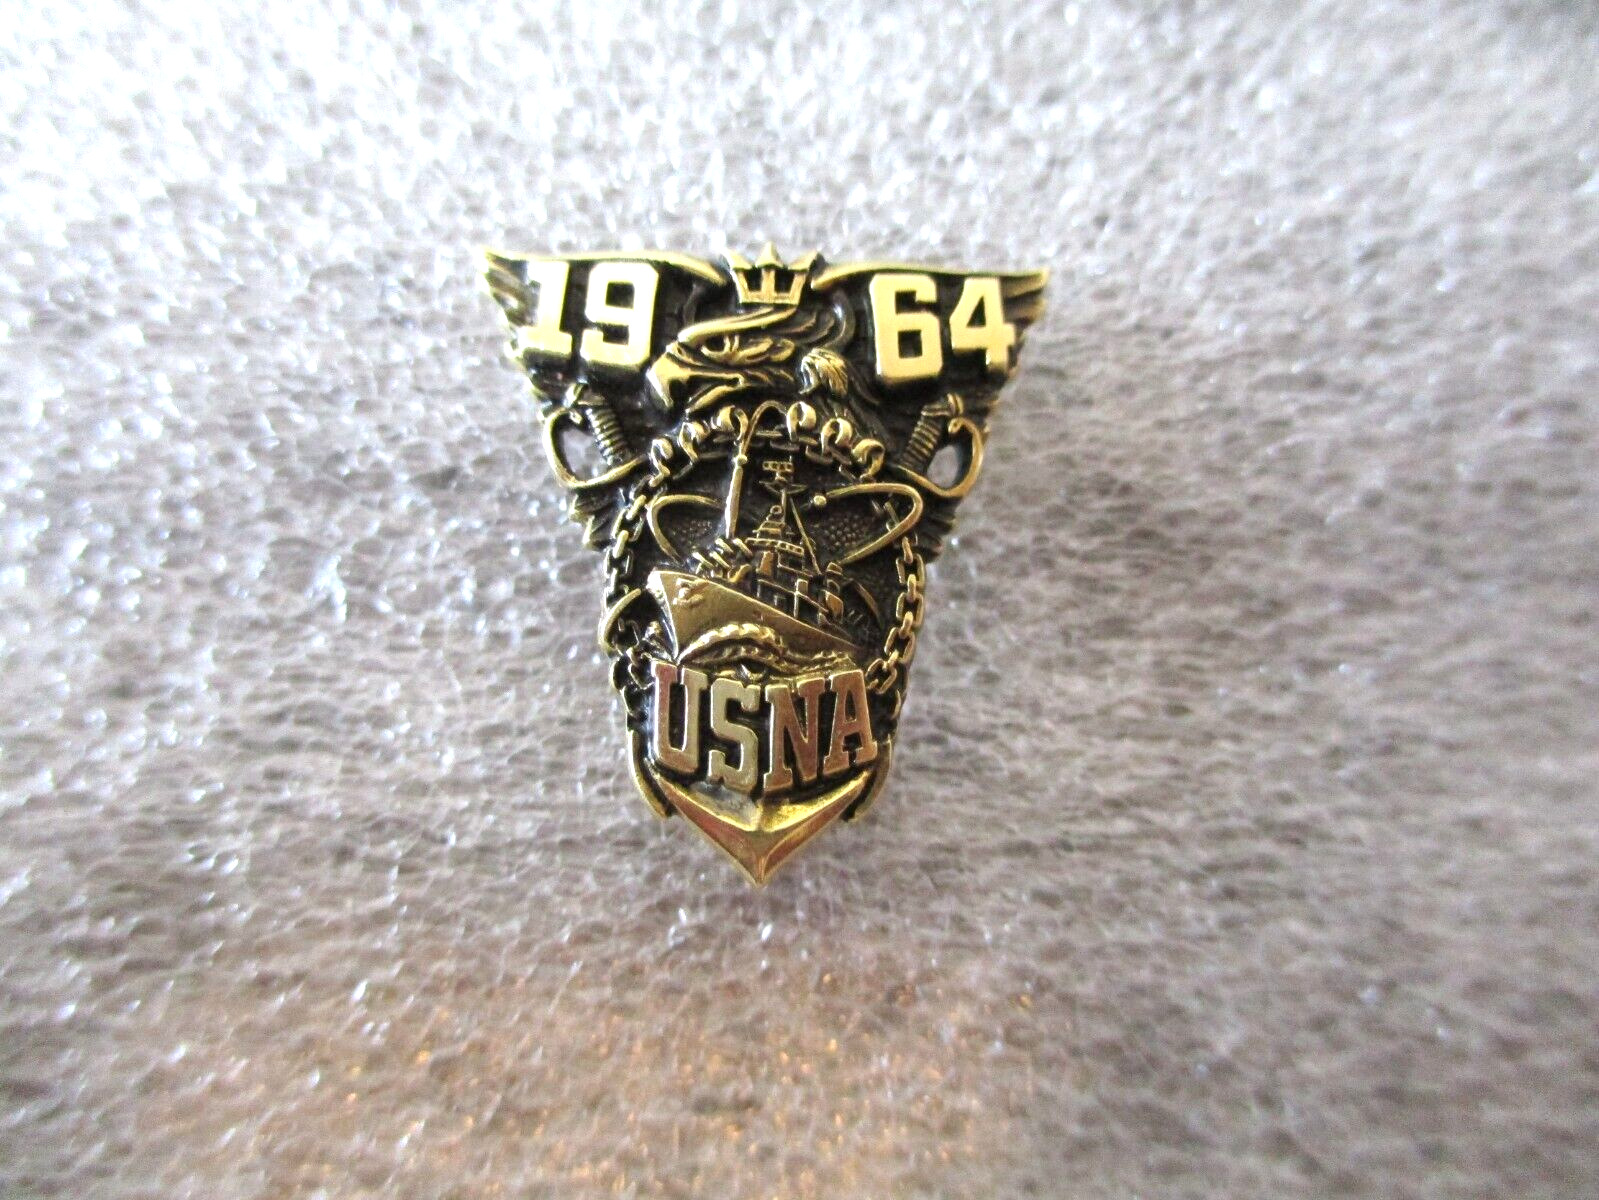 14K USNA 1964 MILITARY PIN BALFOUR - YELLOW GOLD - 4.44g - appx. 21 x 21 mm